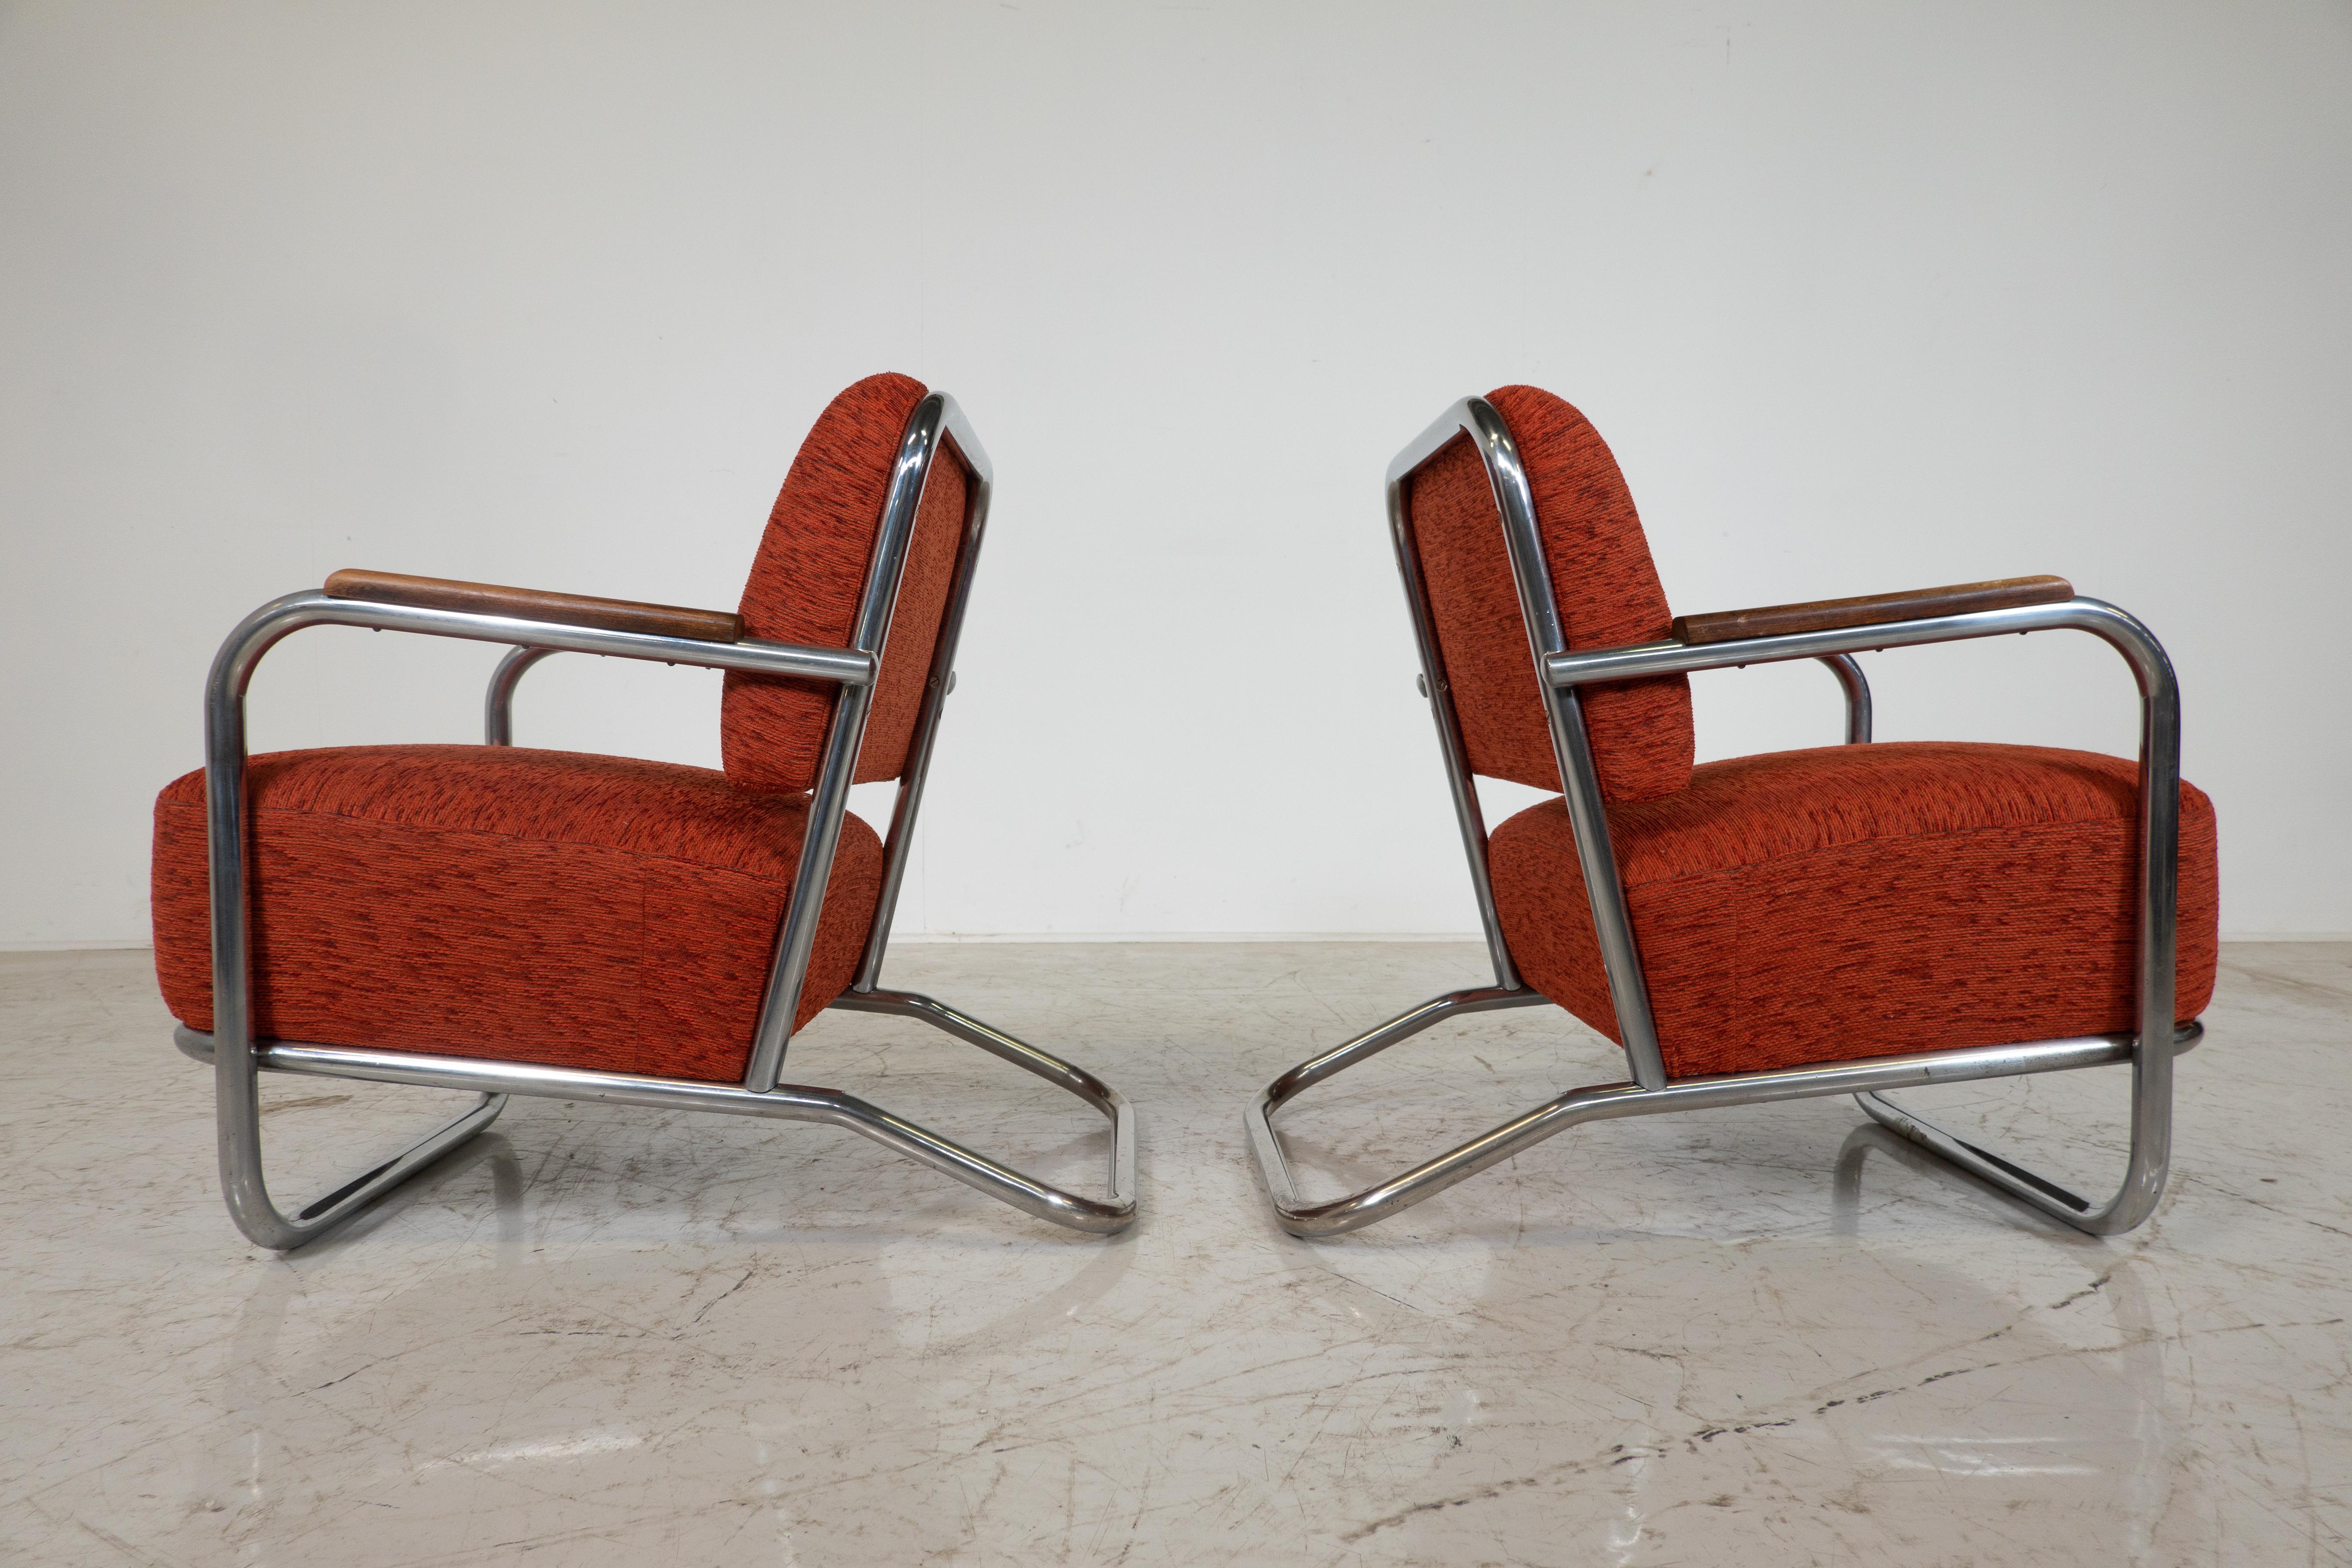 Pair Of Bauhaus Armchairs, Hynek Gottwald - 1930s In Good Condition For Sale In Brussels, BE